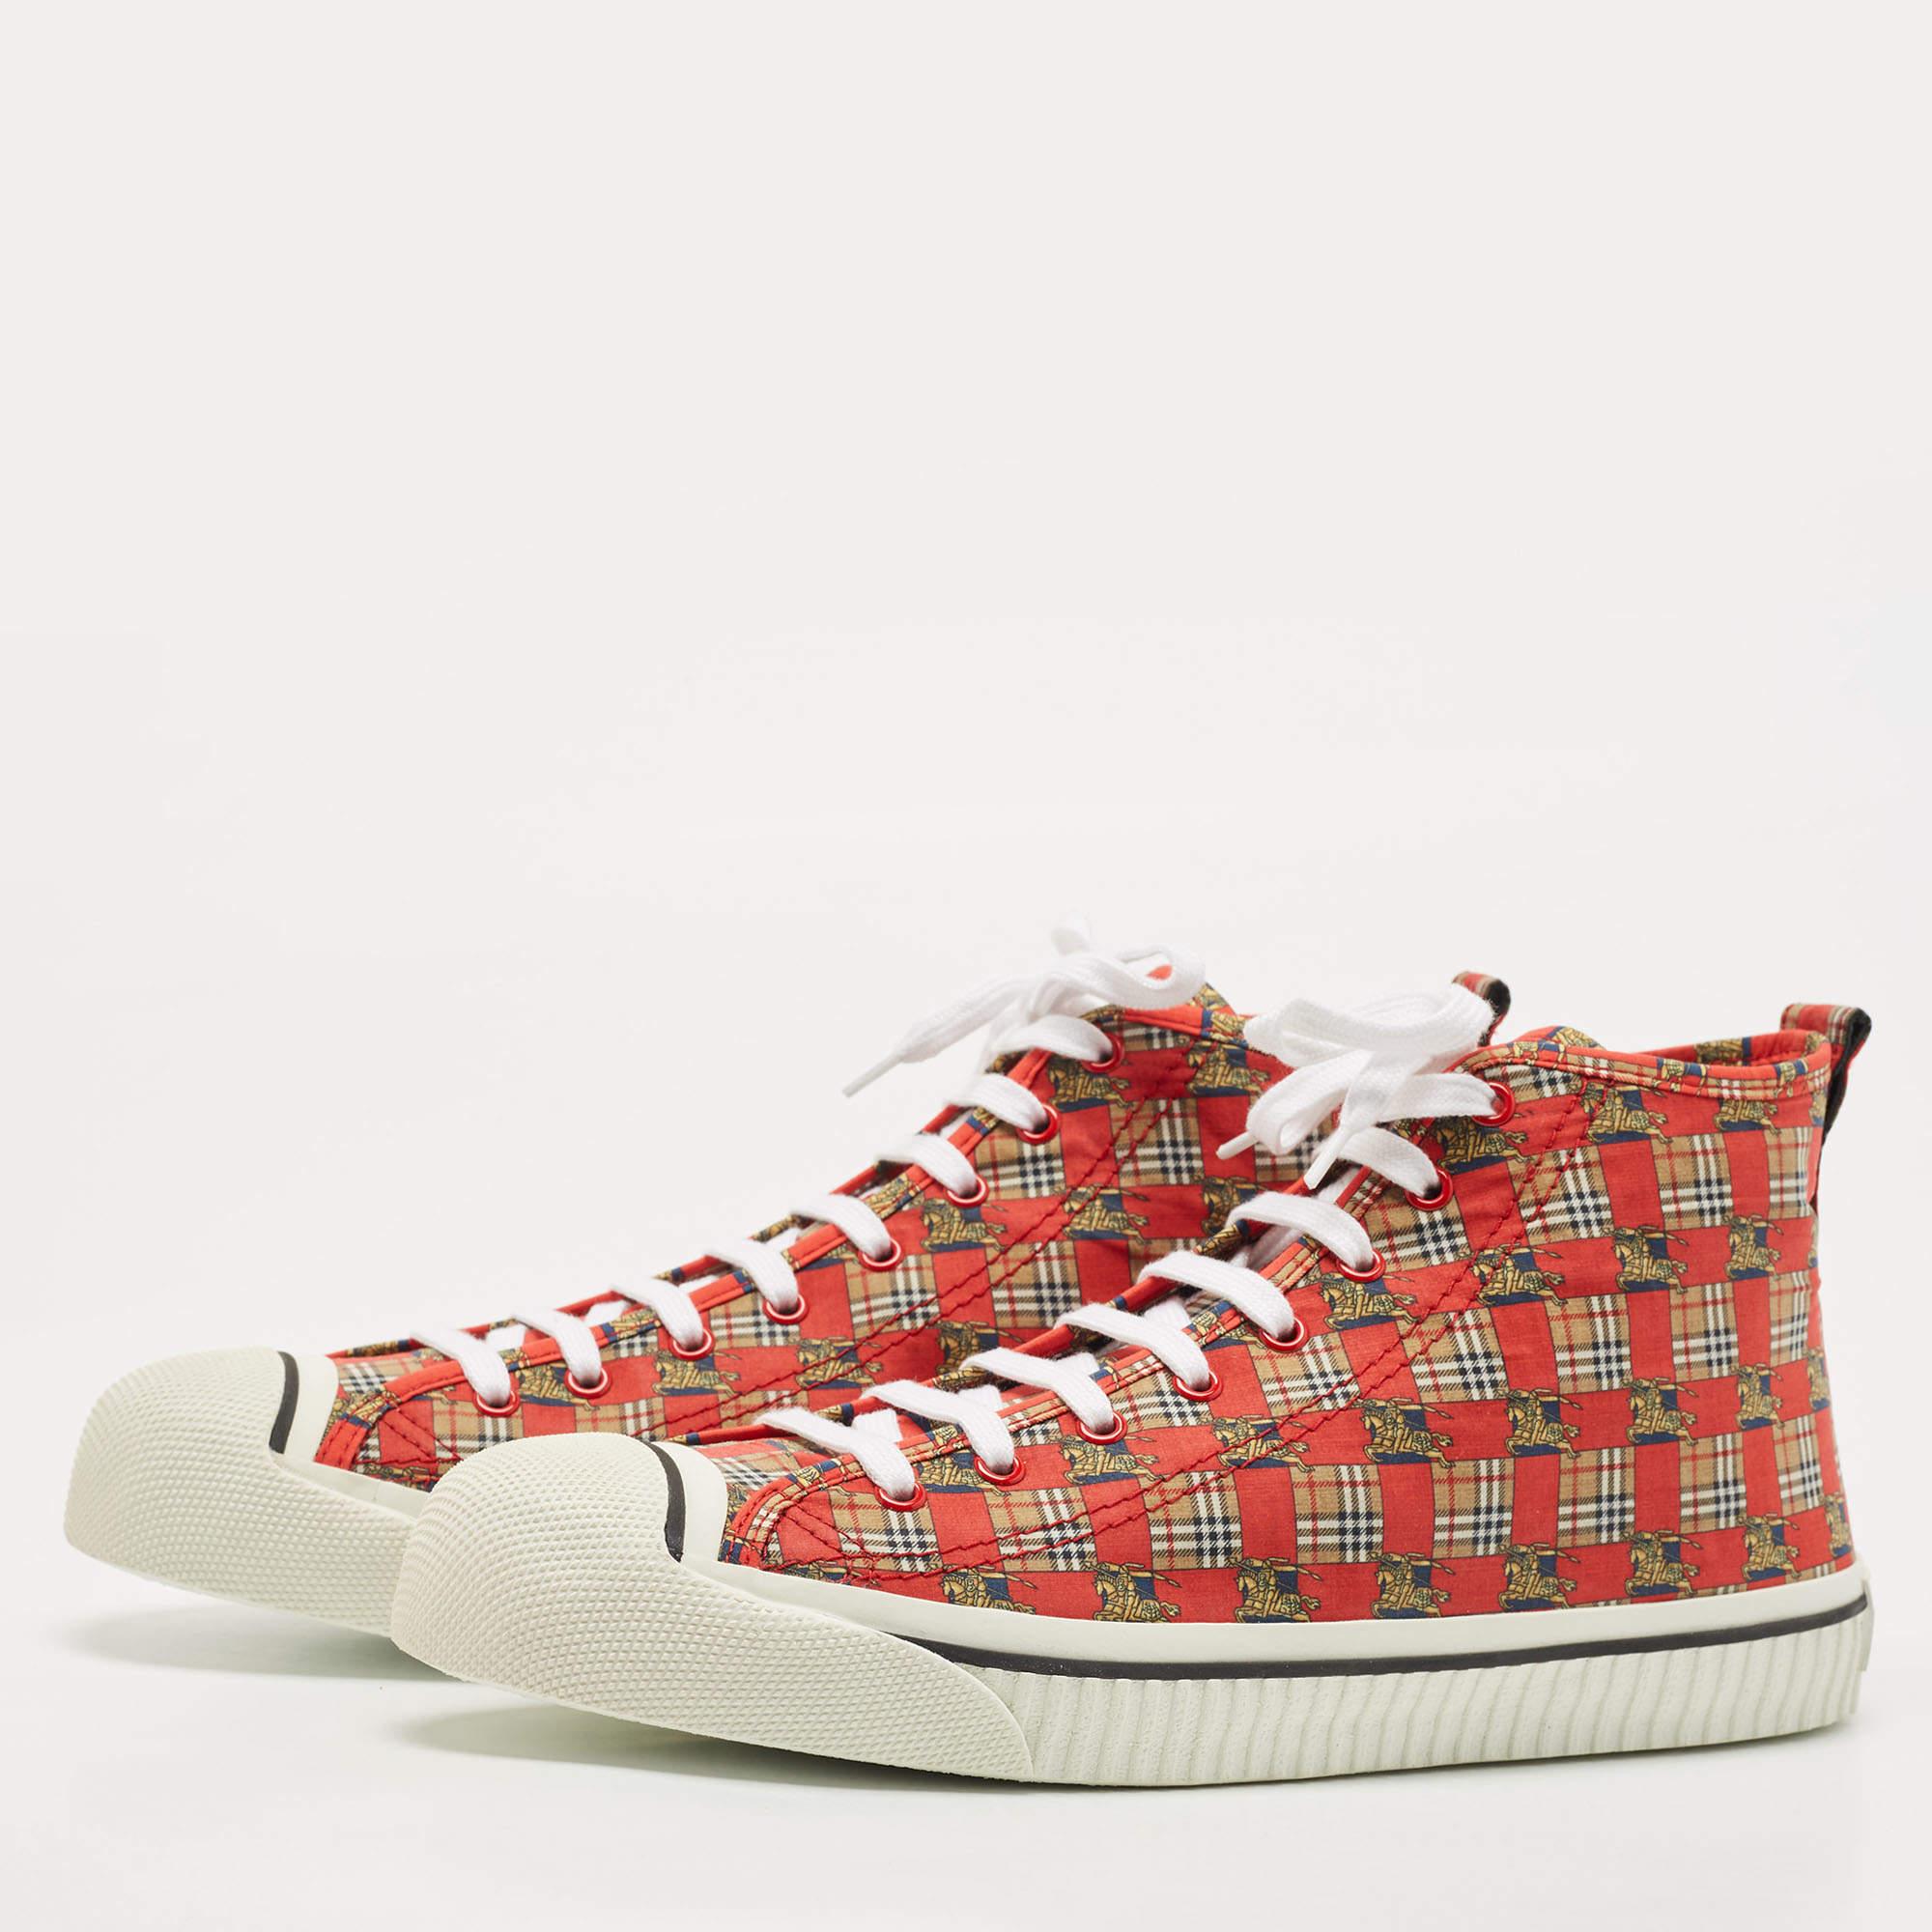 Burberry Red Check Fabric Kingly High Top Sneakers Size 45 In New Condition For Sale In Dubai, Al Qouz 2